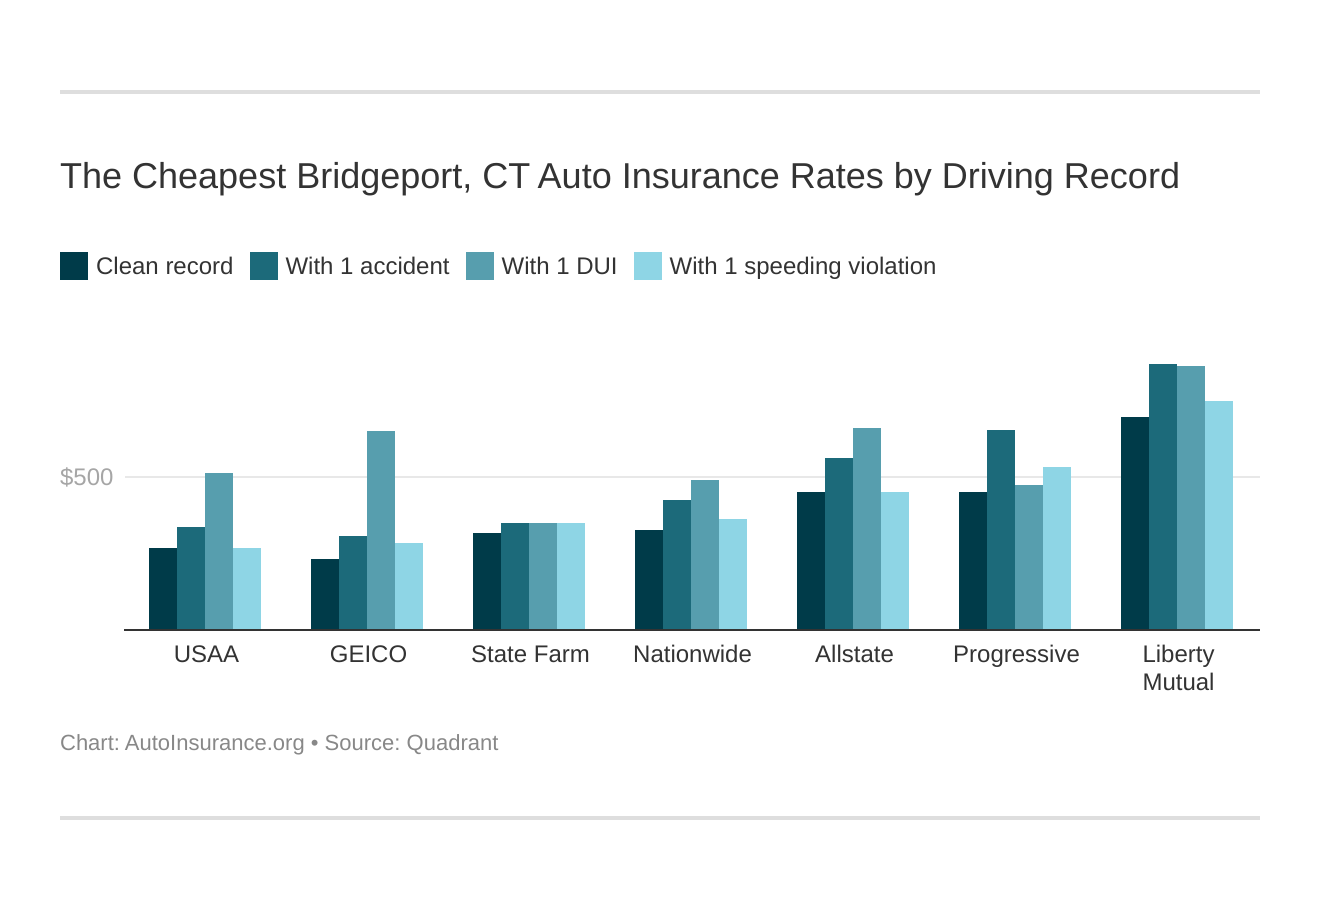 The Cheapest Bridgeport, CT Auto Insurance Rates by Driving Record